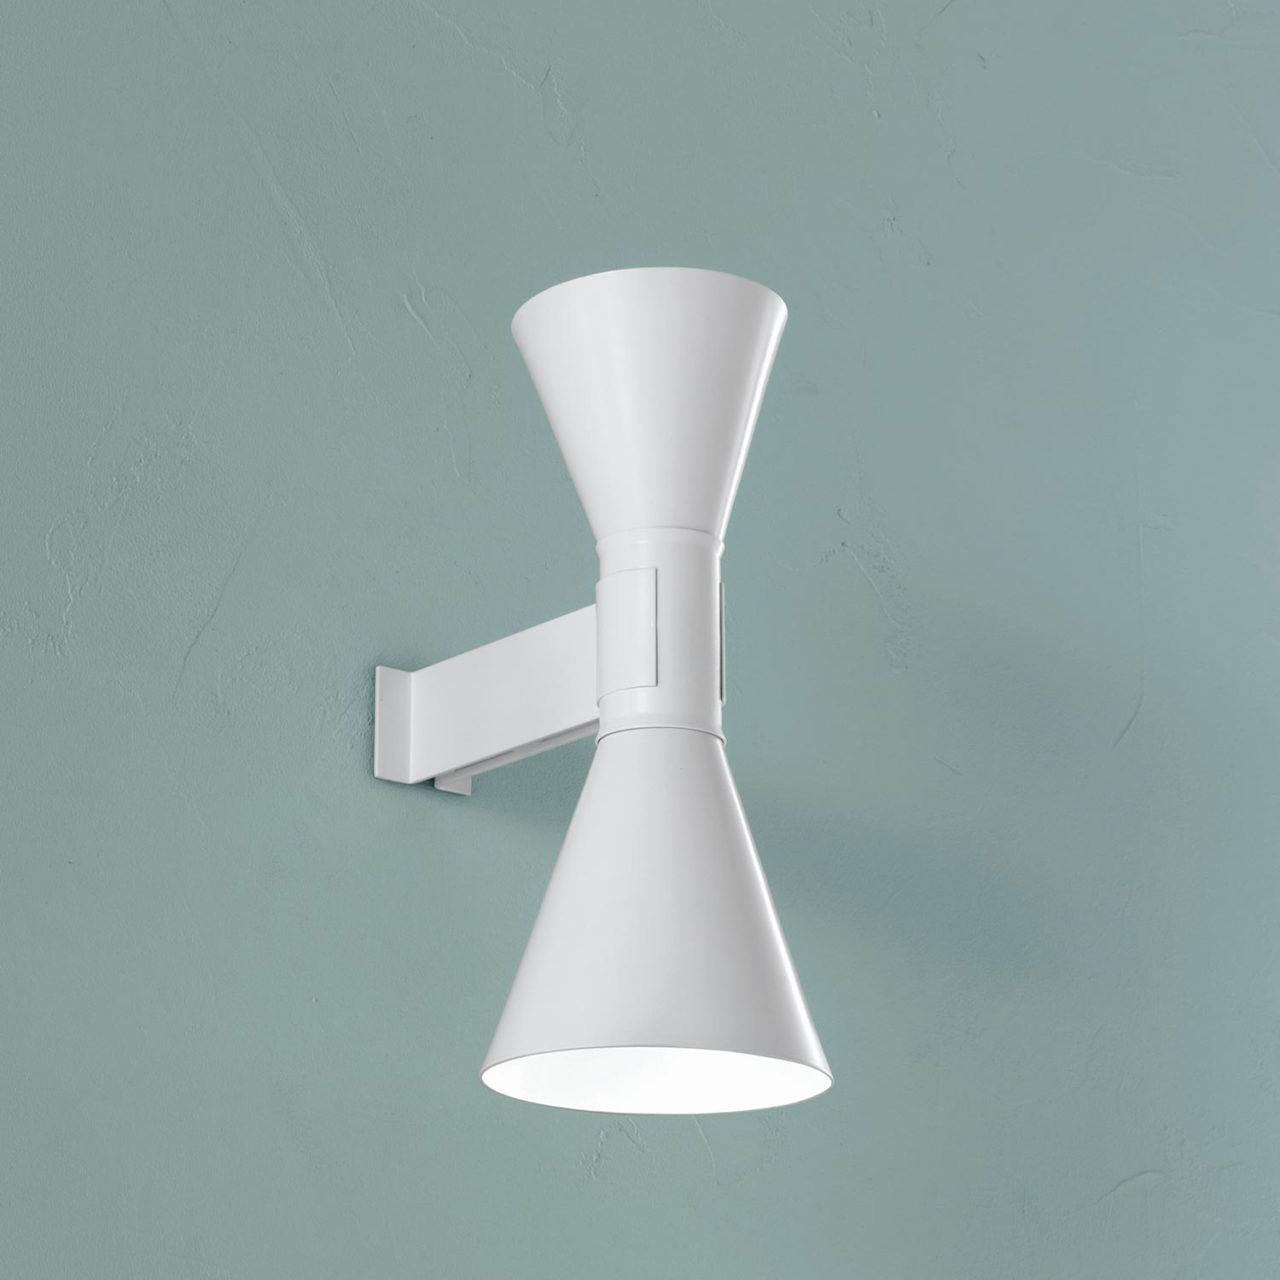 White wall washer light